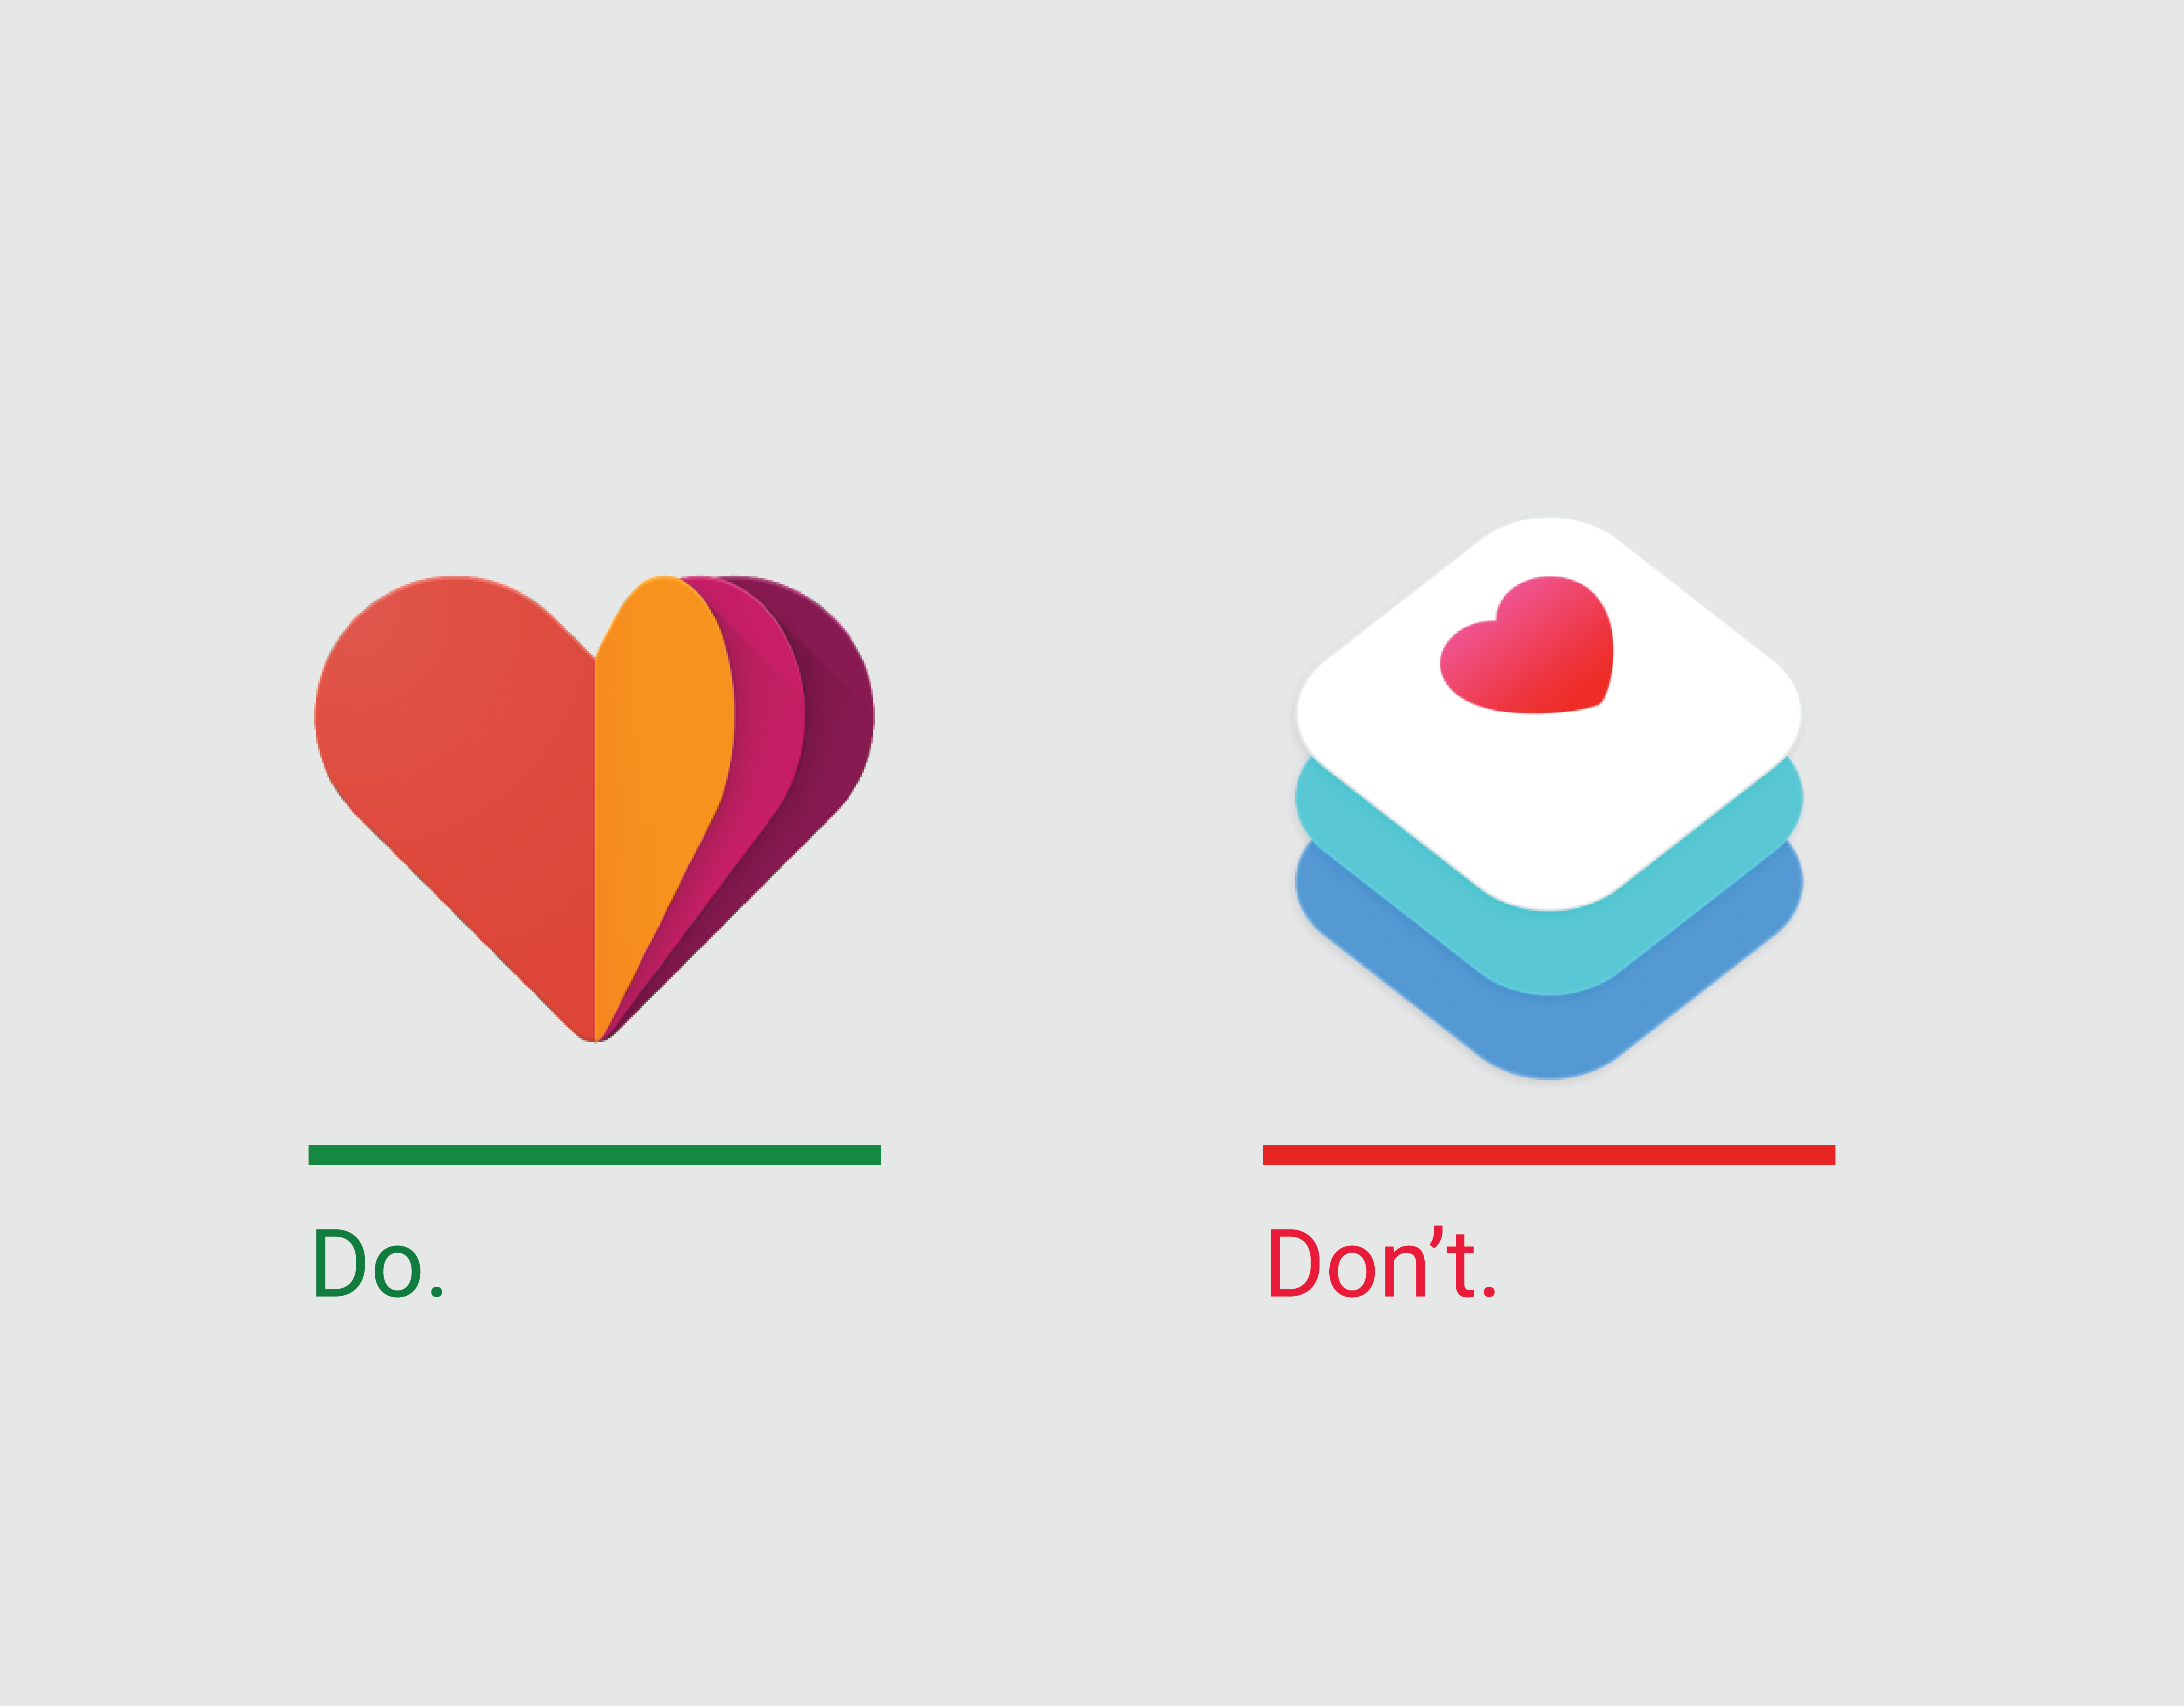 Icons - Style - Material Design